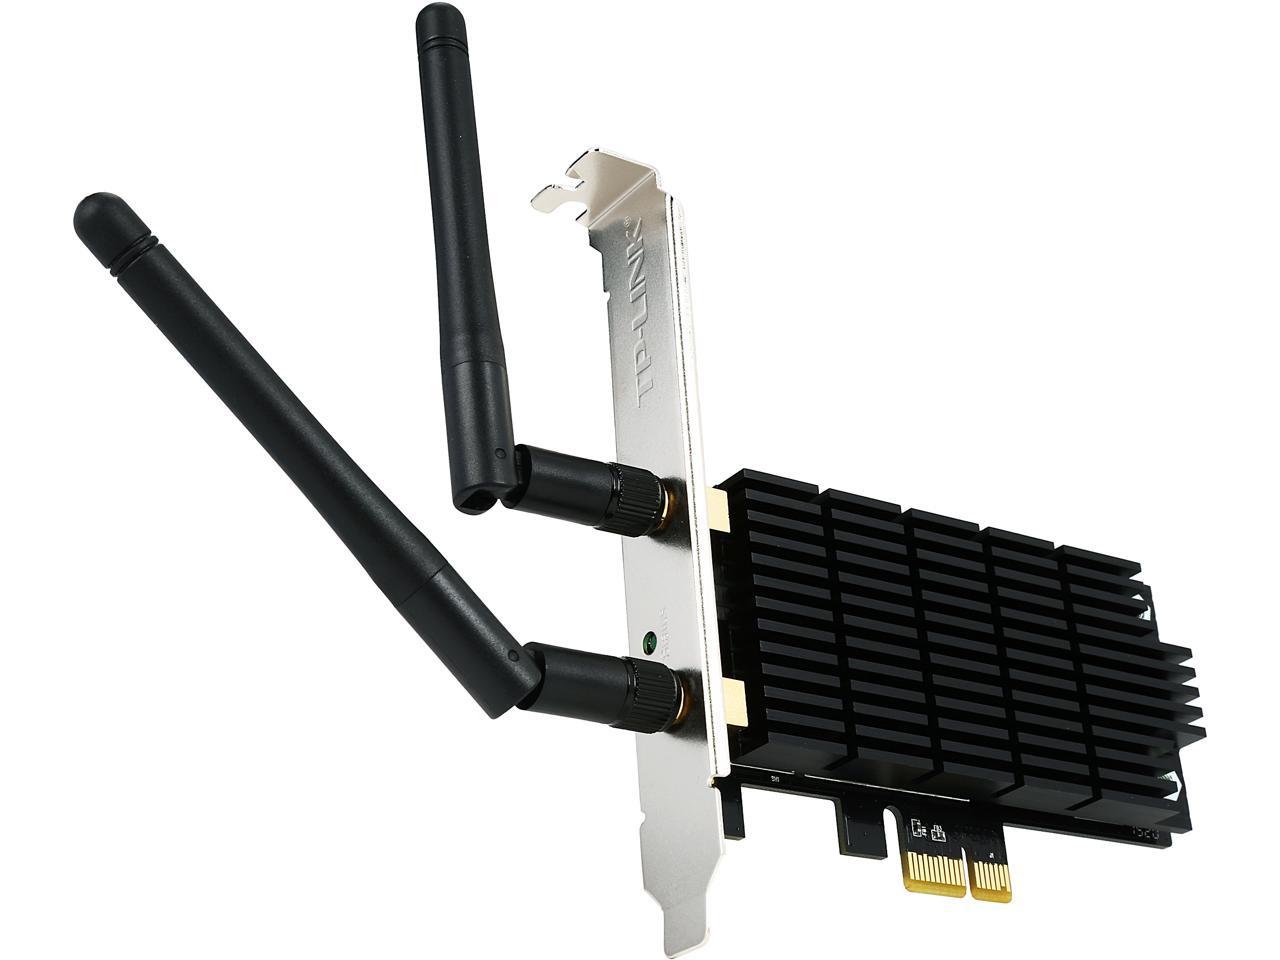 TP-Link Archer T6E AC1300 Wireless Dual Band PCI Express Adapter IEEE 802.11ac / n / a 5GHz, IEEE 802.11b / g / n 2.4GHz PCI Express 867 Mbps at 5 GHz 400 Mbps at 2.4 GHz Wireless Data Rates